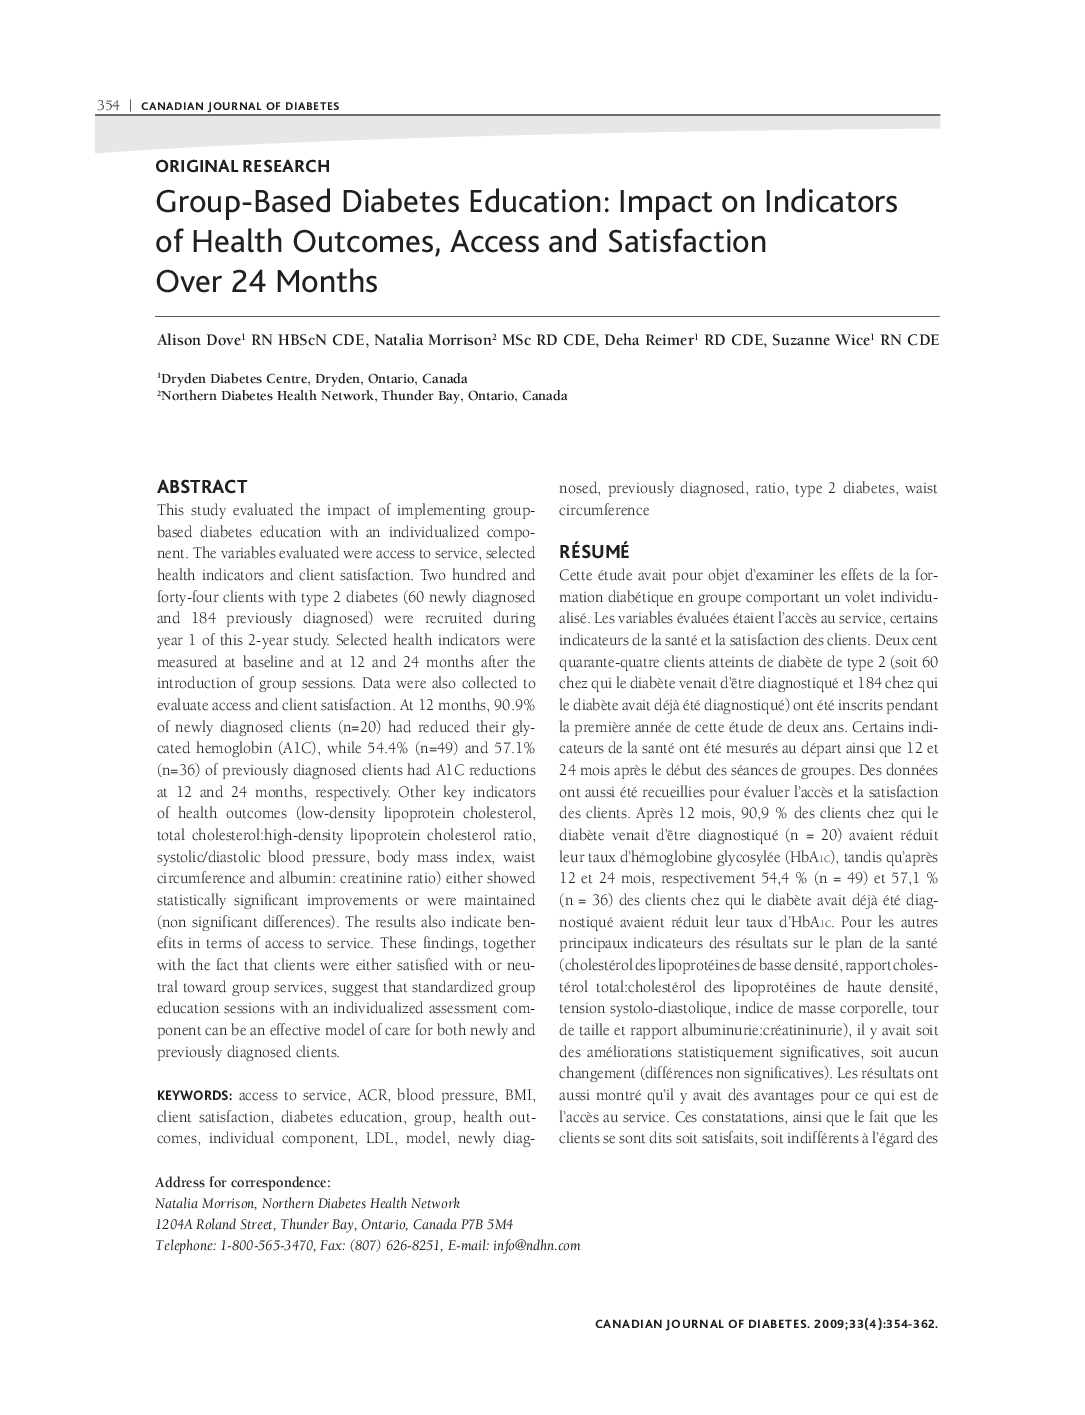 Group-Based Diabetes Education: Impact on Indicators of Health Outcomes, Access and Satisfaction Over 24 Months